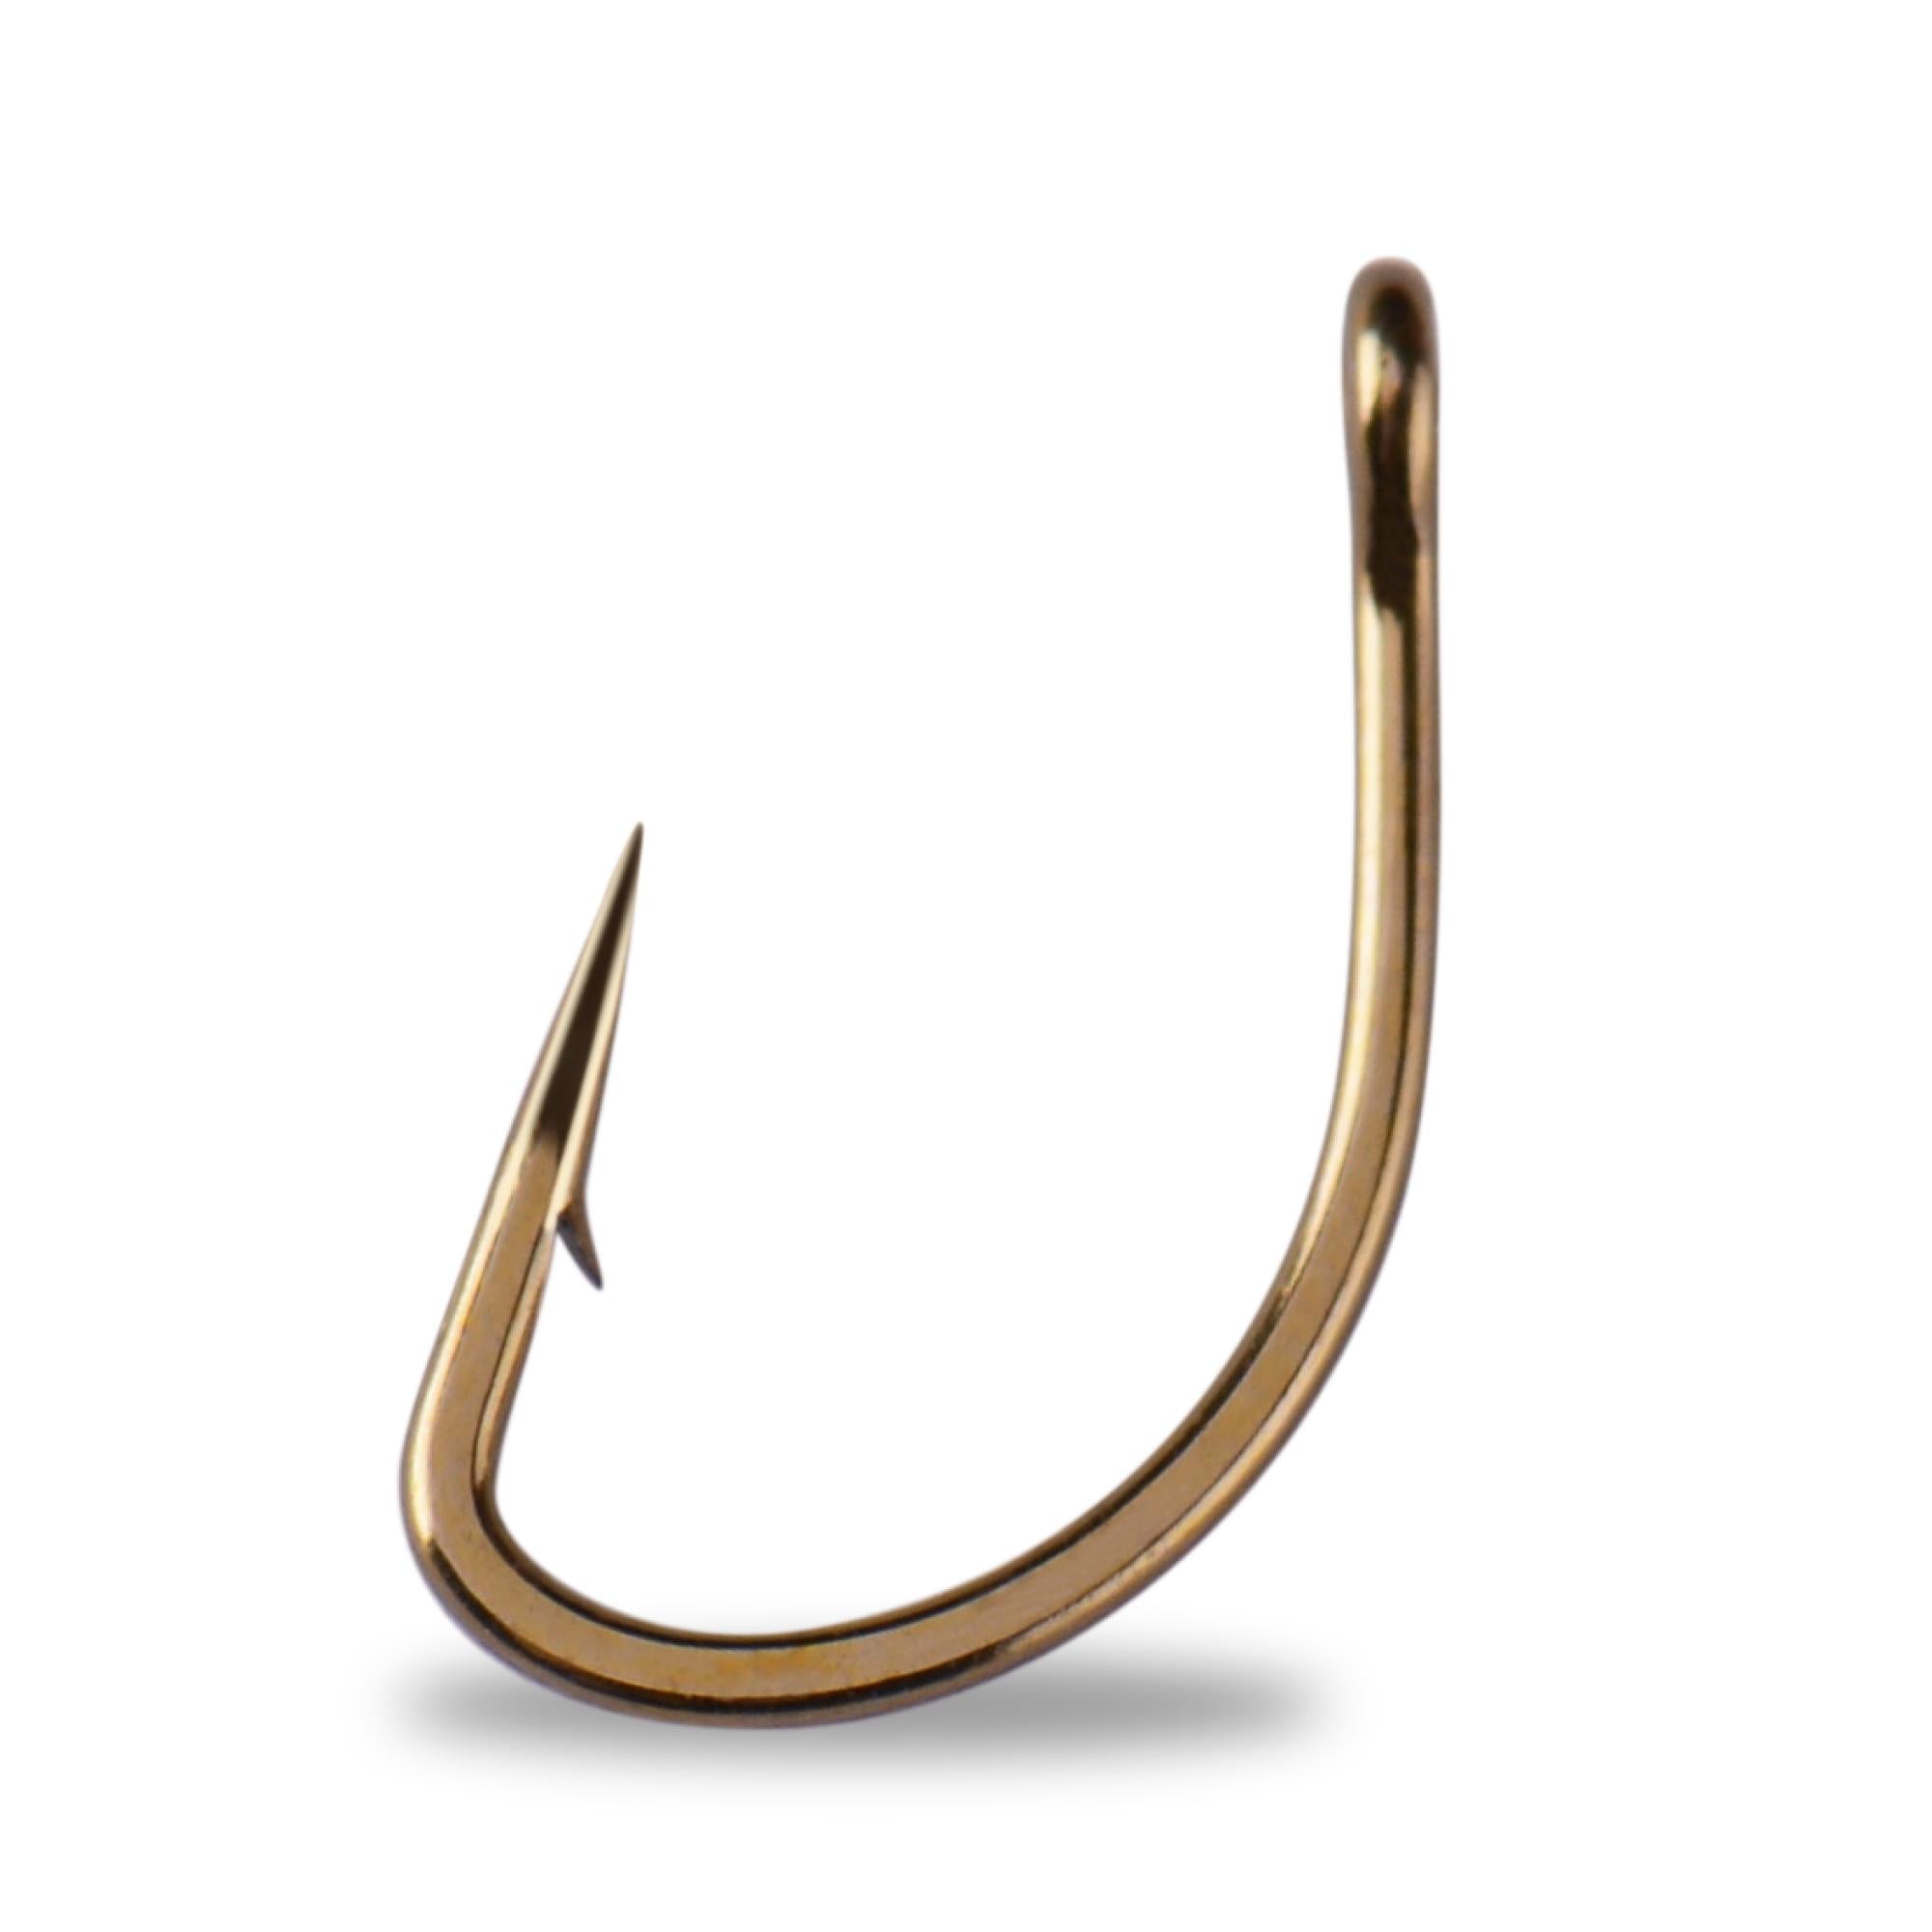 Mustad - Big Game Hooks - Size 2/0, 8 pack - $1.95 - 9174-20